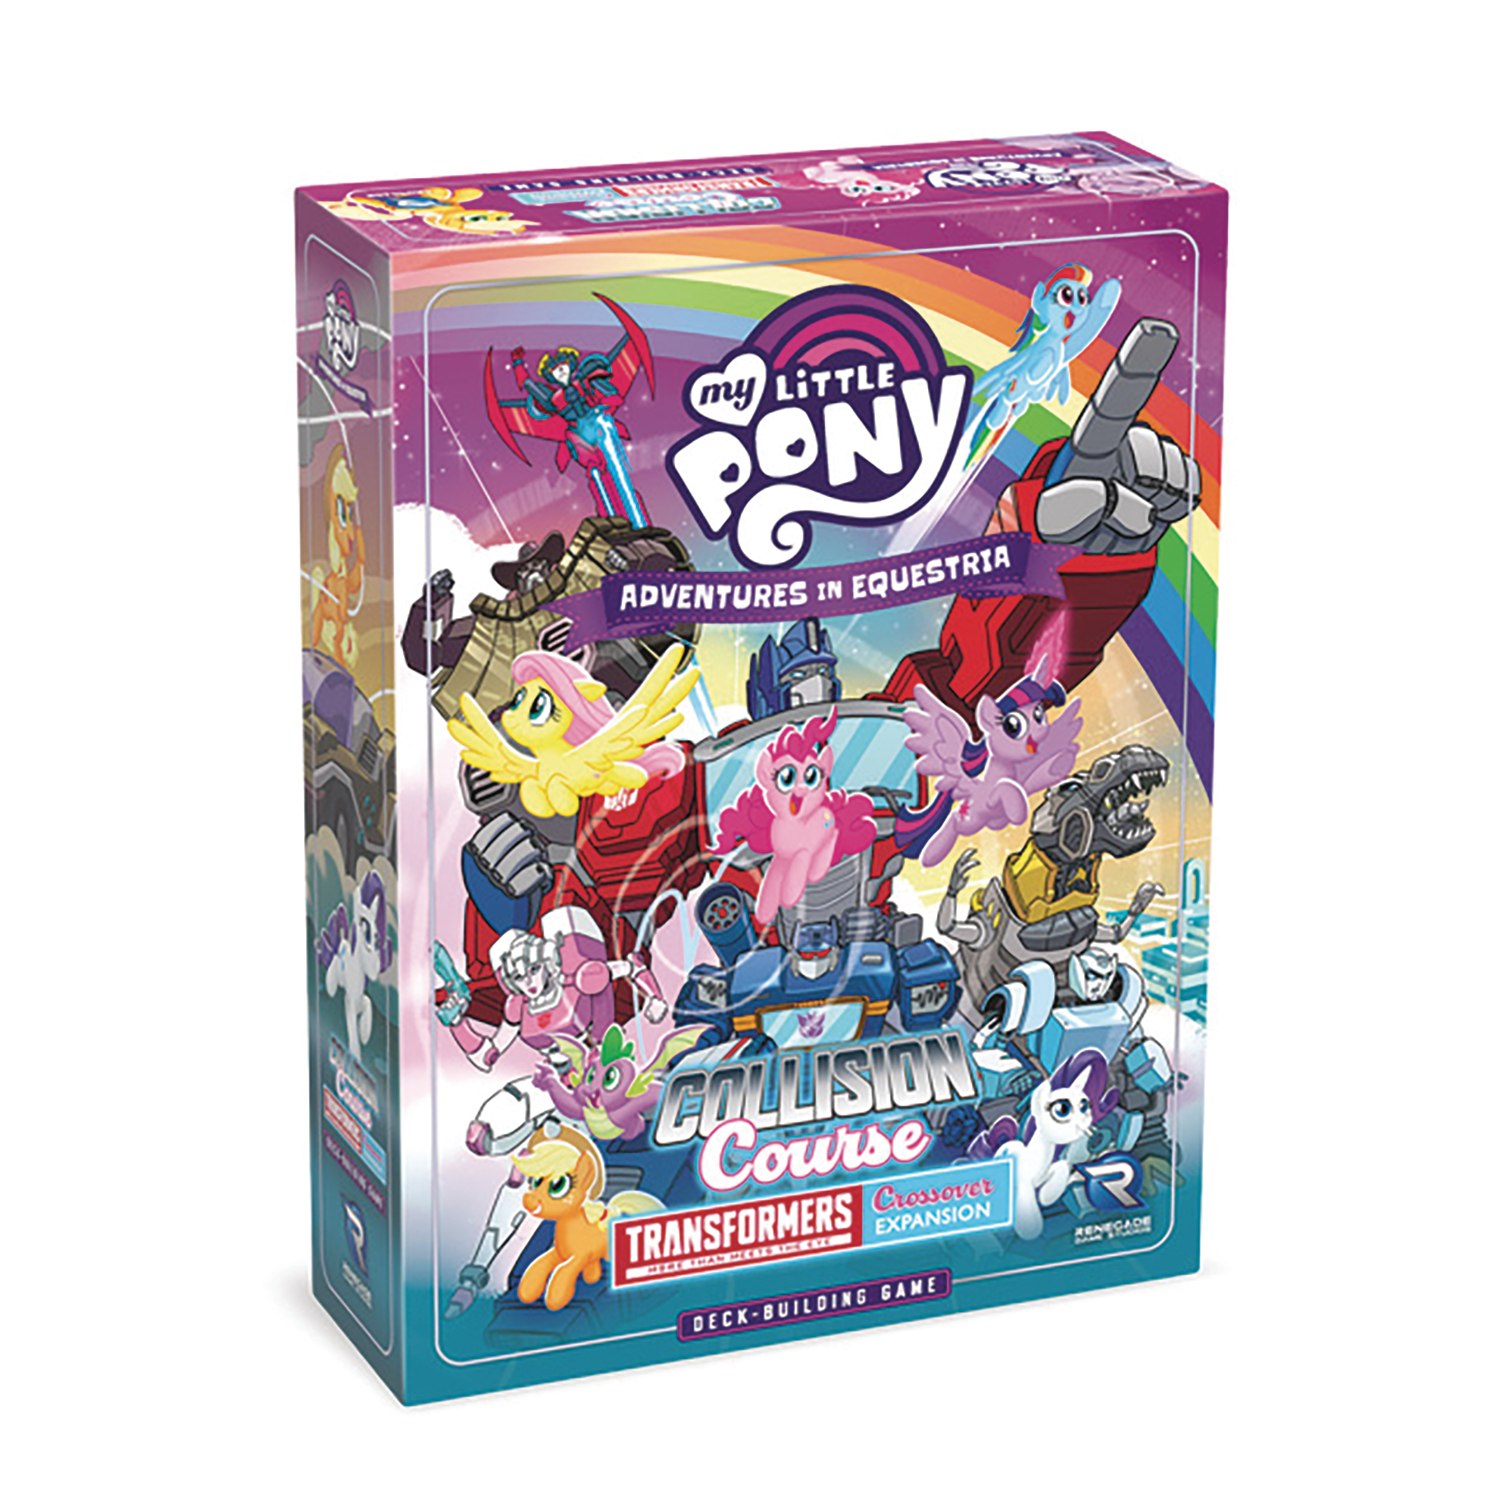 My Little Pony Adventure in Equestria DBG Collision Course Expansion